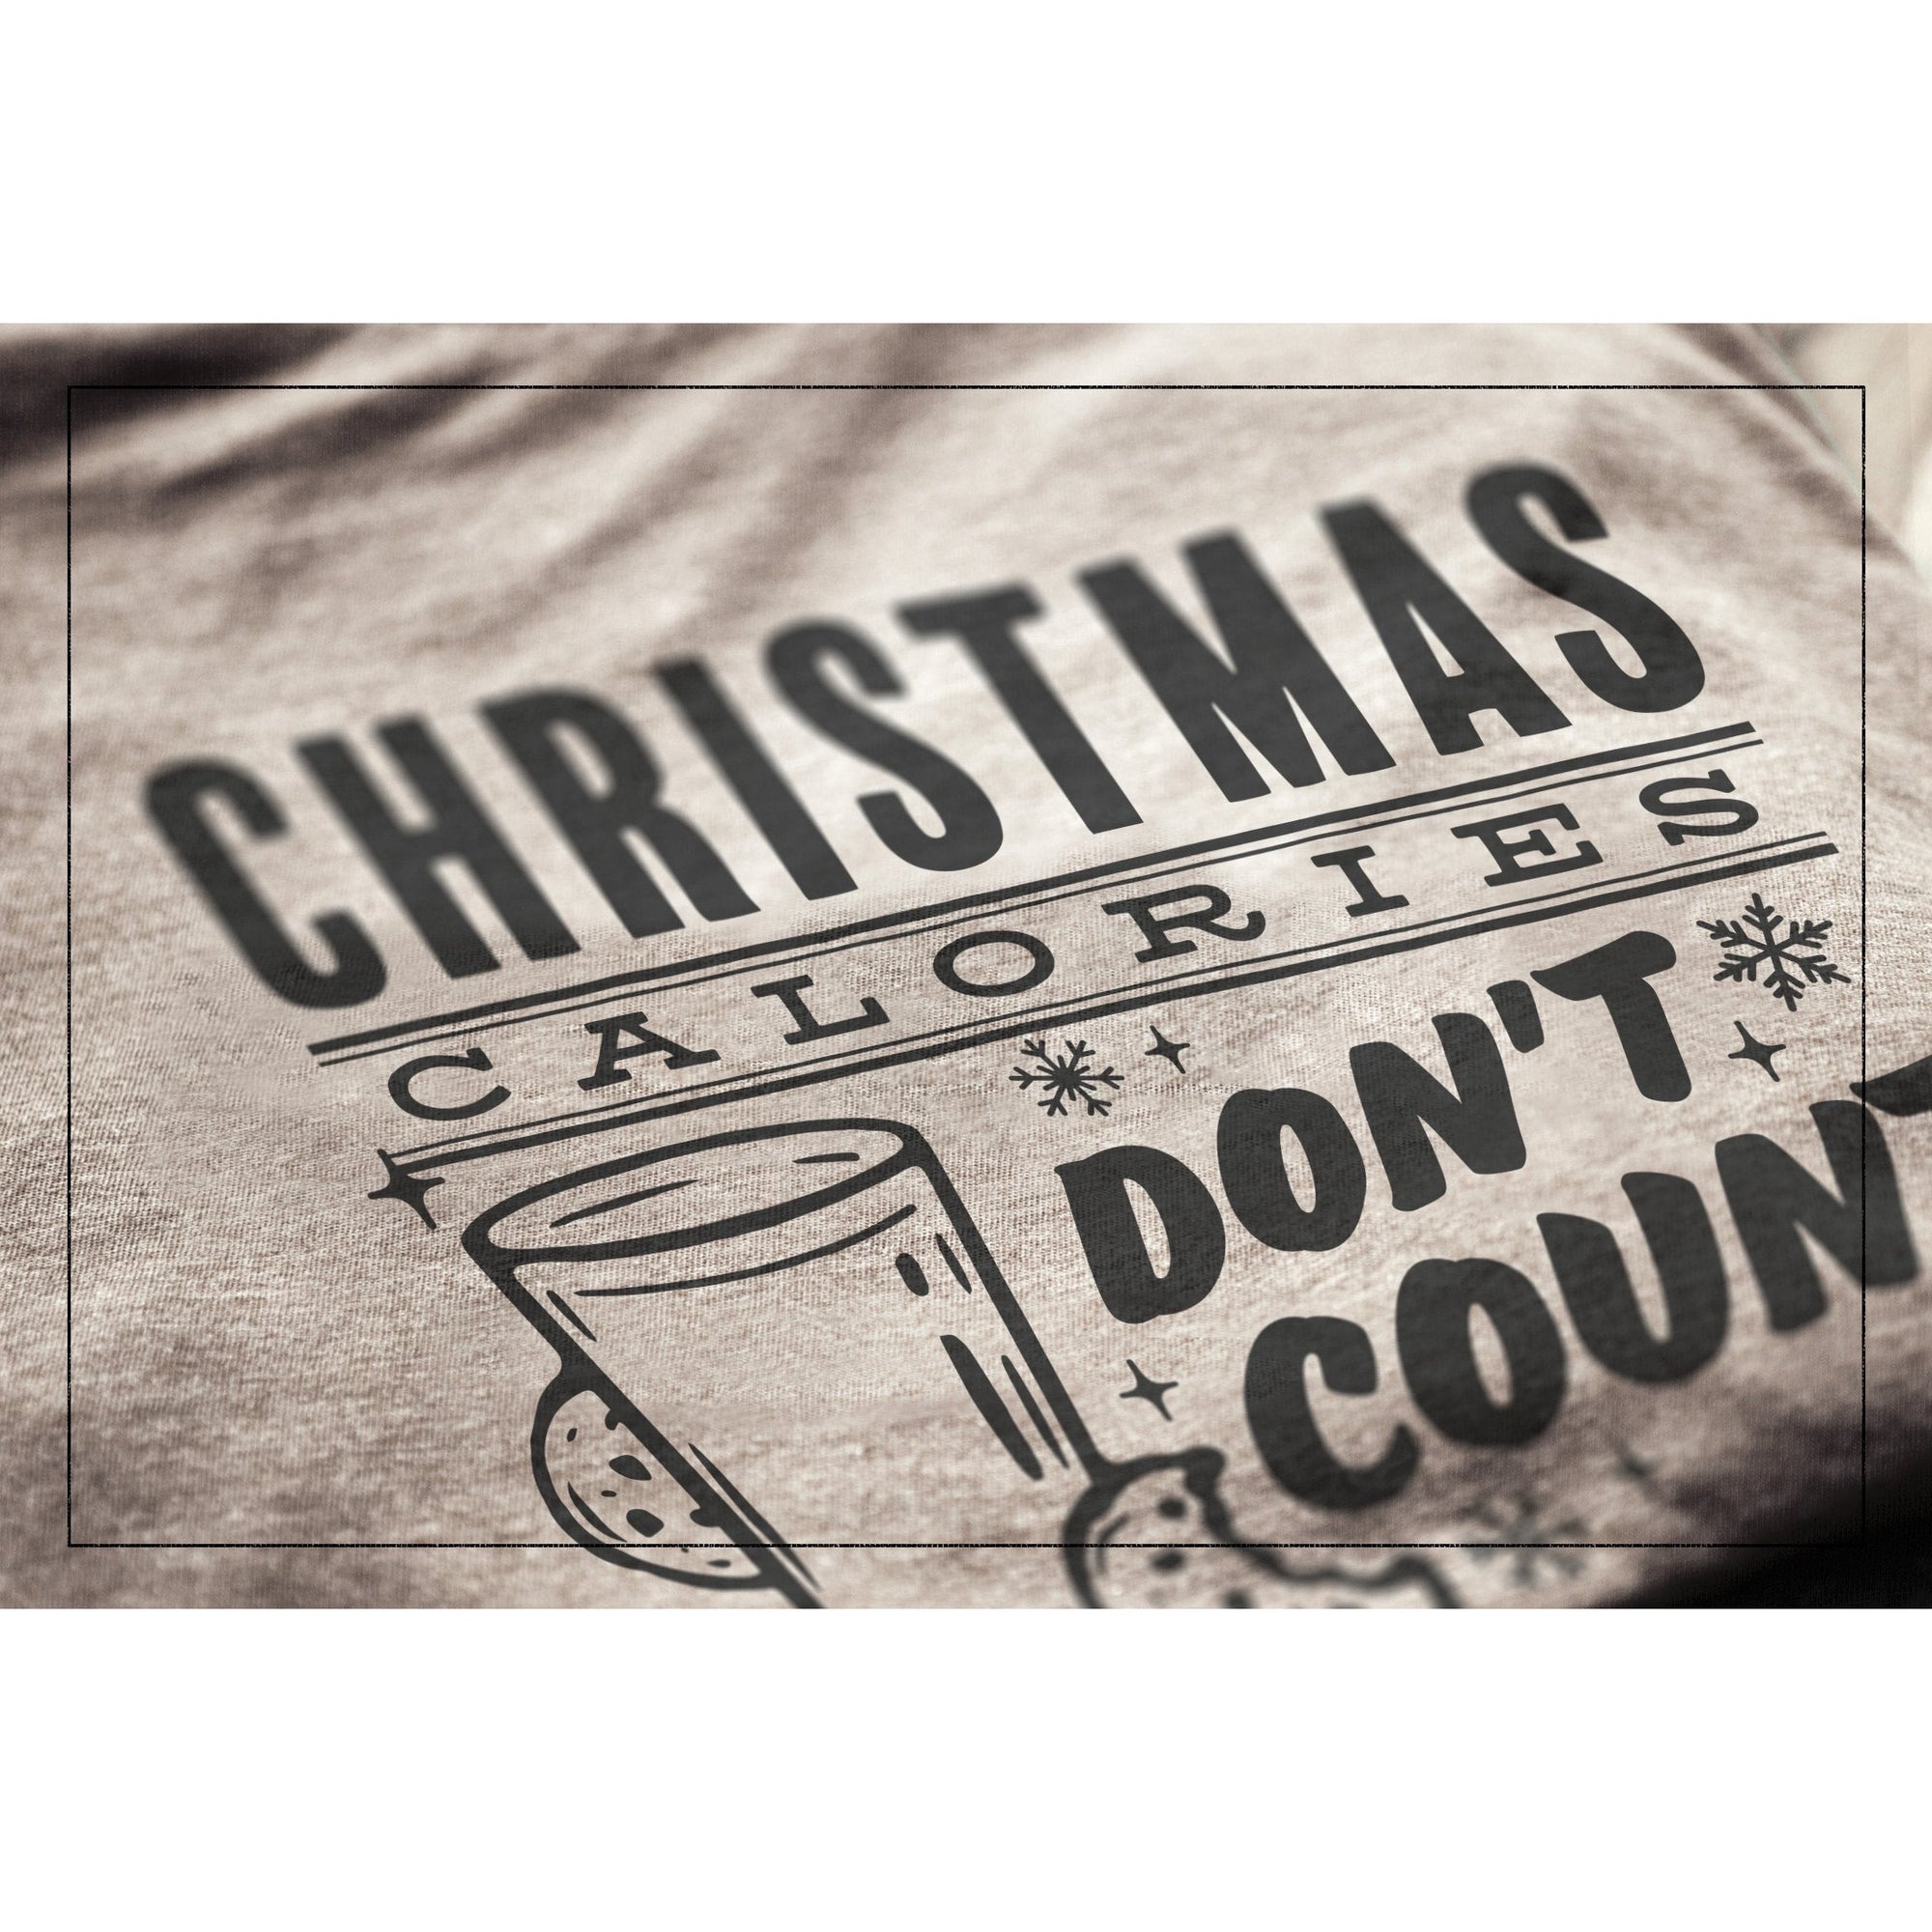 Christmas Calories Don't Count Military Grey Printed Graphic Men's Crew T-Shirt Tee Closeup Details